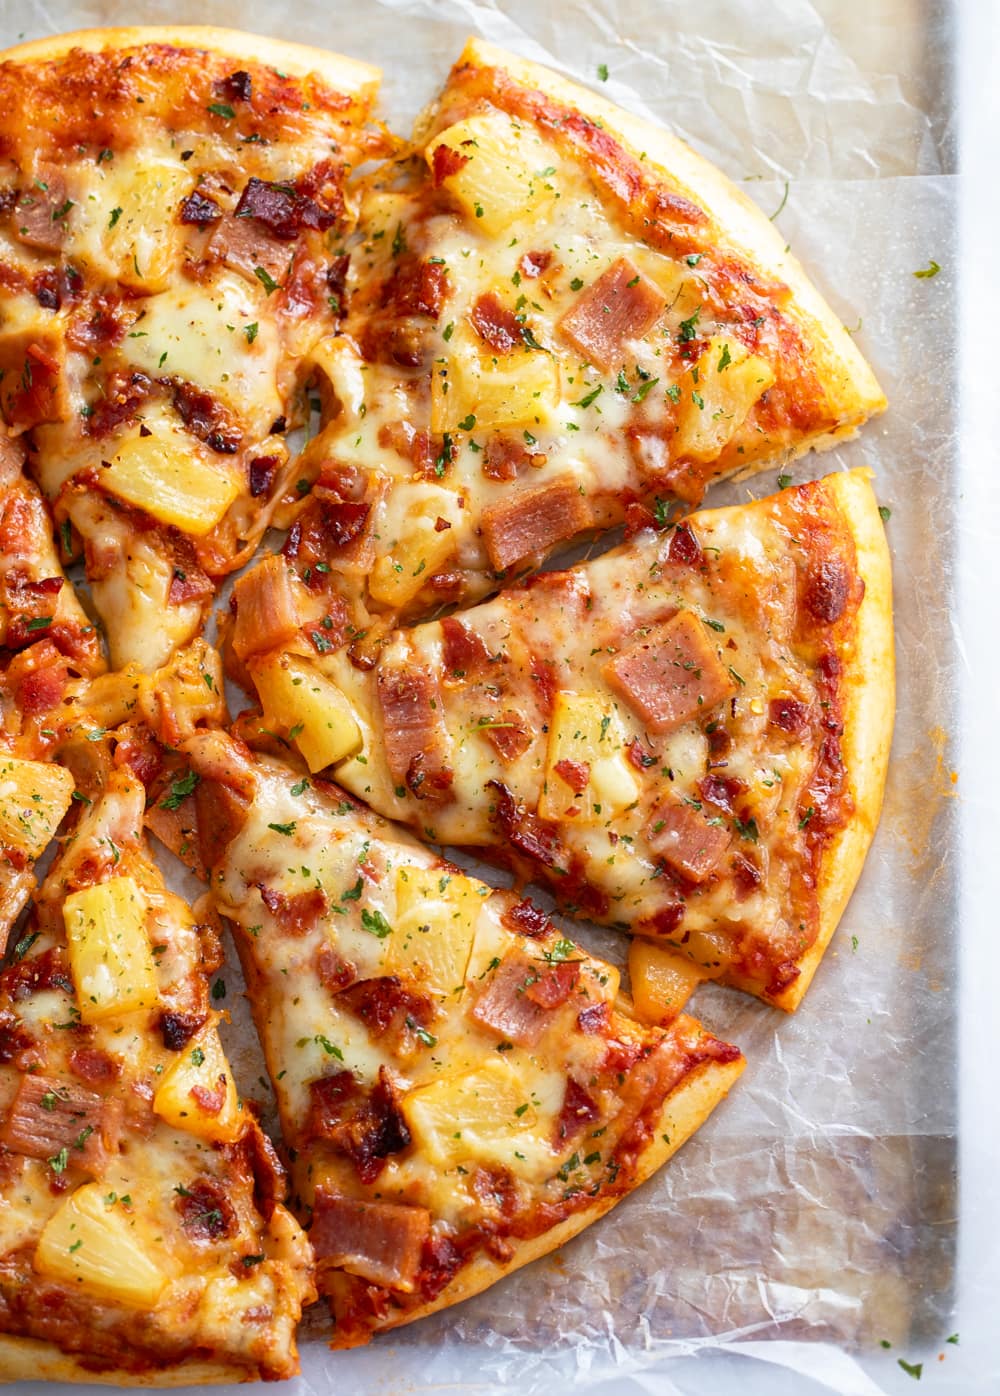 Hawaiian Pizza cut into slices topped with cheese, ham, bacon, and pineapple.